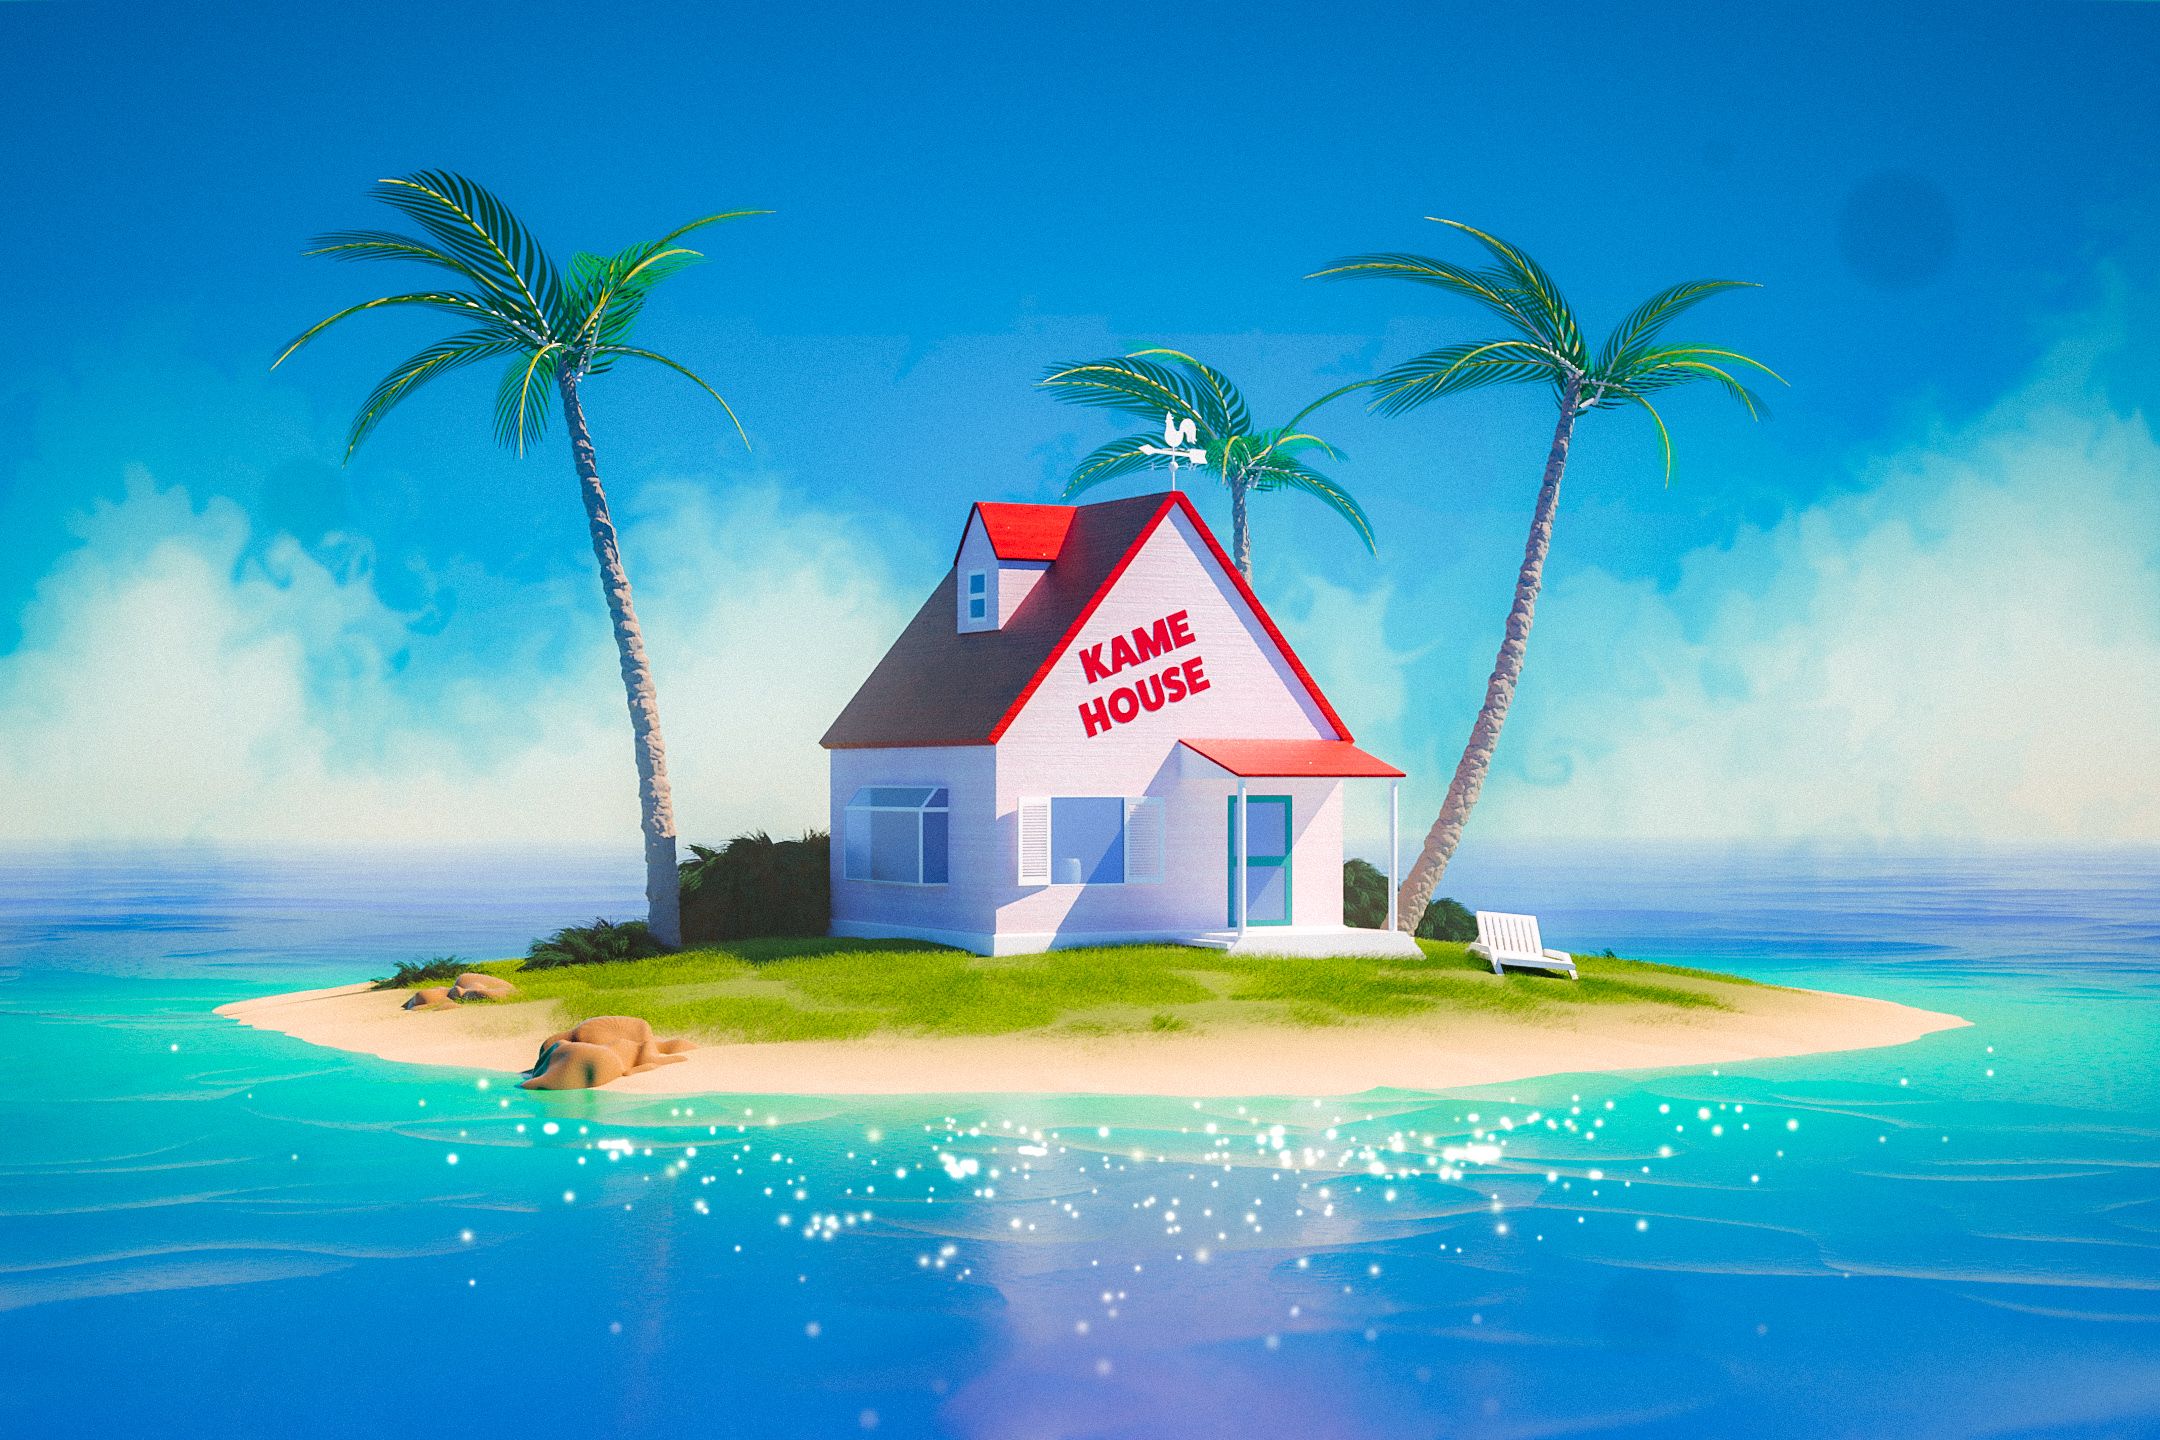 Kame House HD Wallpapers Free Download 